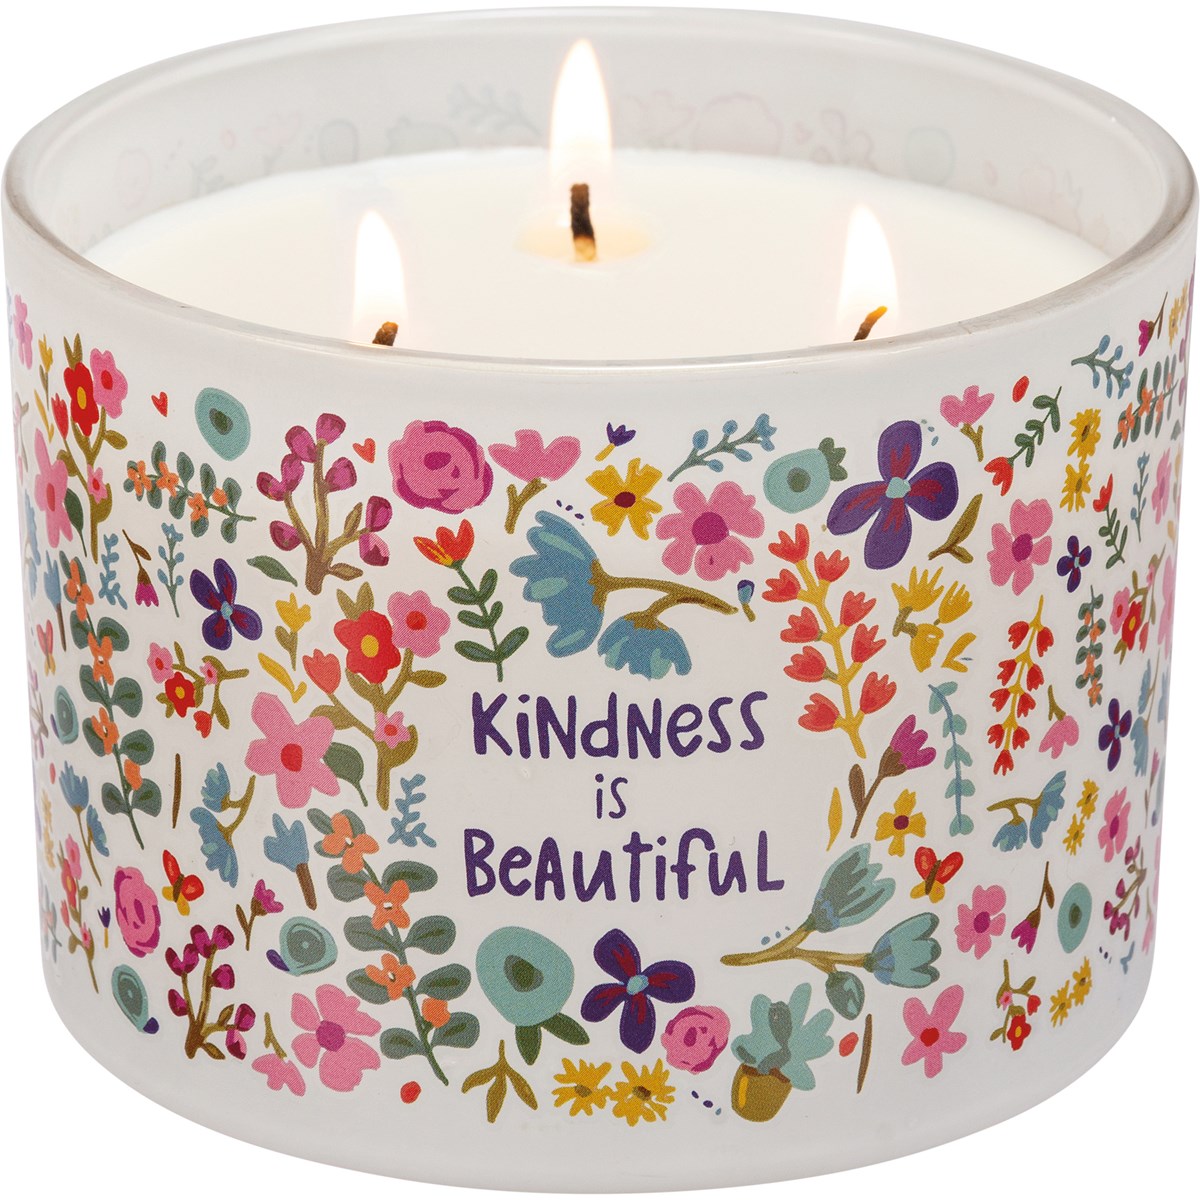 Kindness Is Beautiful Candle - Soy Wax, Glass, Cotton